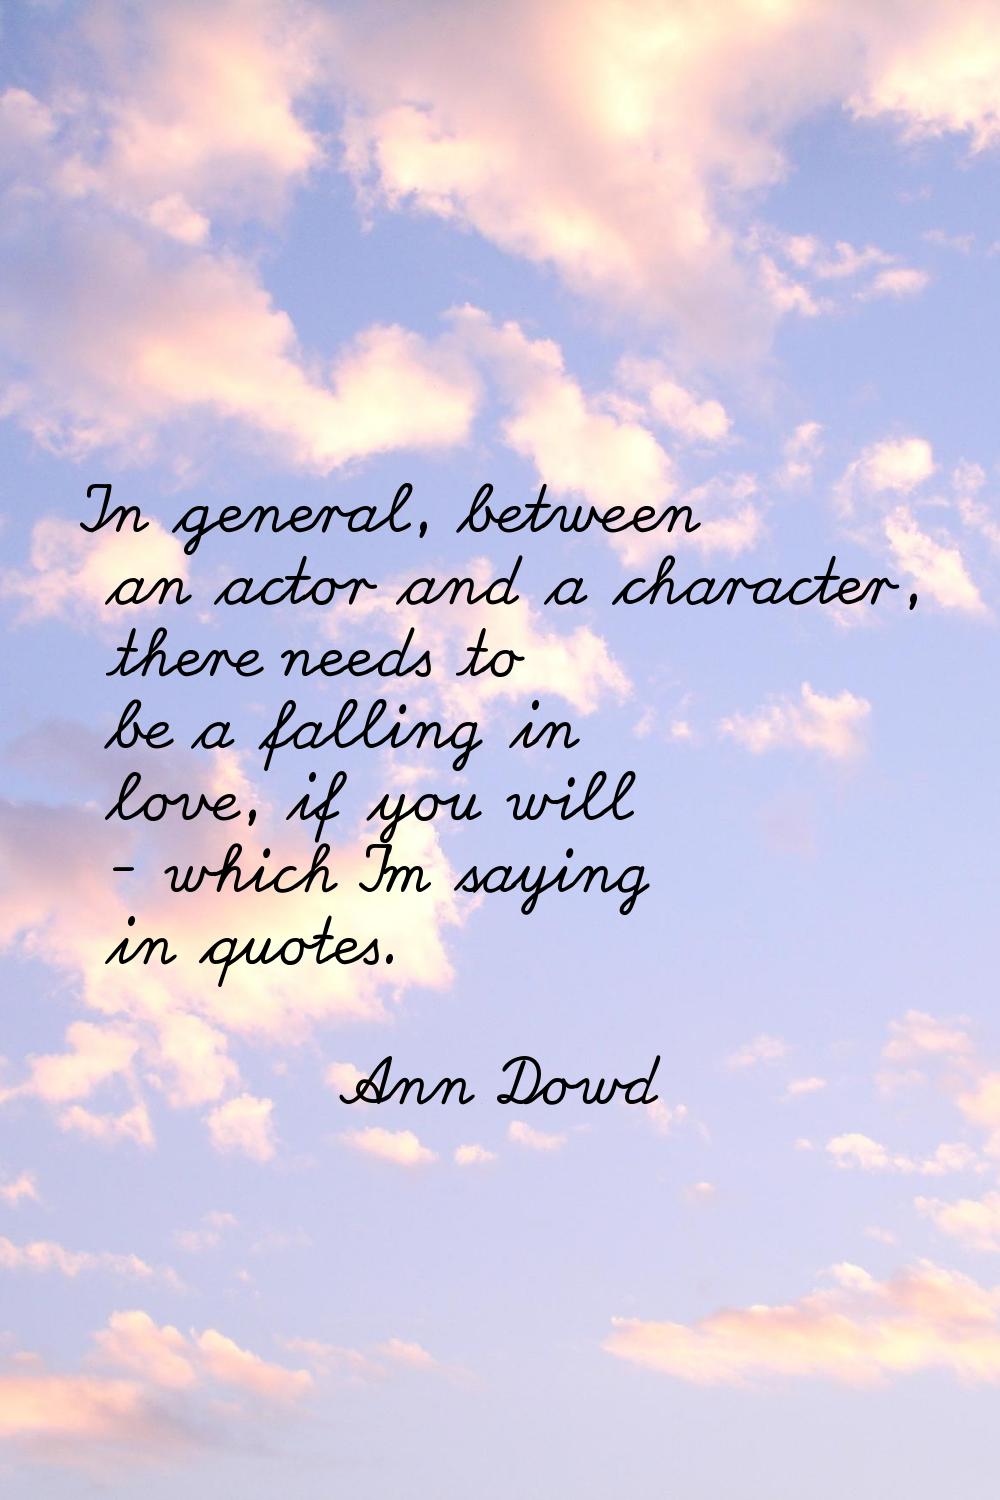 In general, between an actor and a character, there needs to be a falling in love, if you will - wh